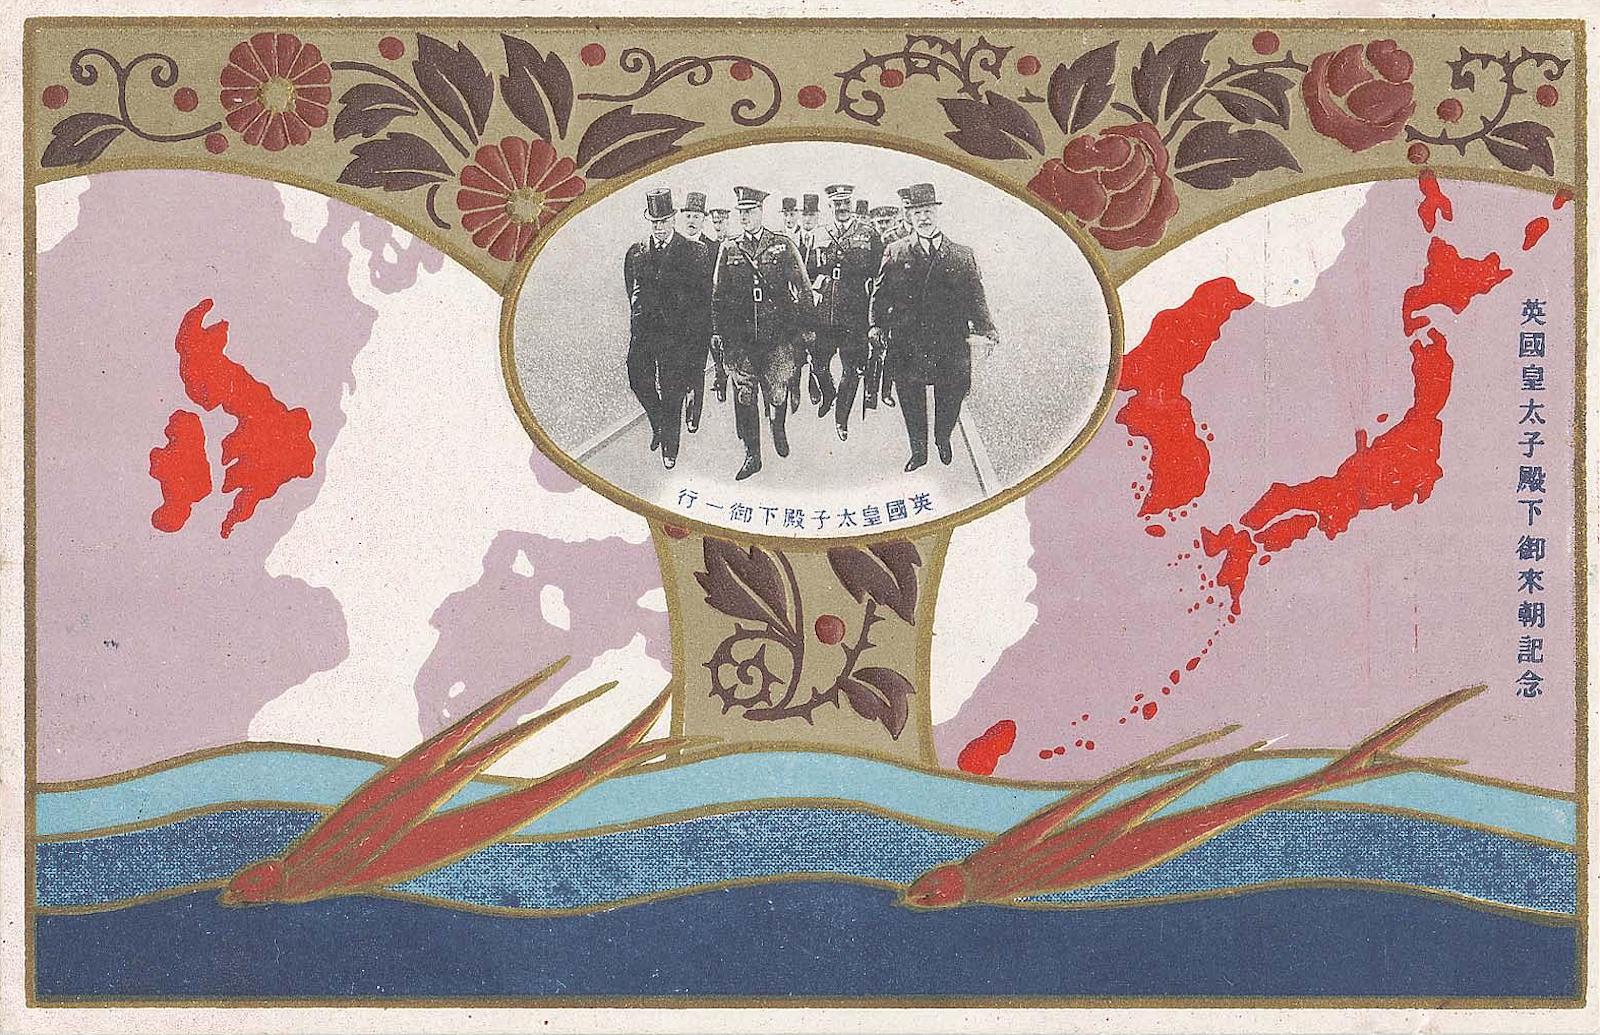 A souvenir postcard from the Prince of Wales’ visit to Japan in 1922. MFA Boston. Public Domain.